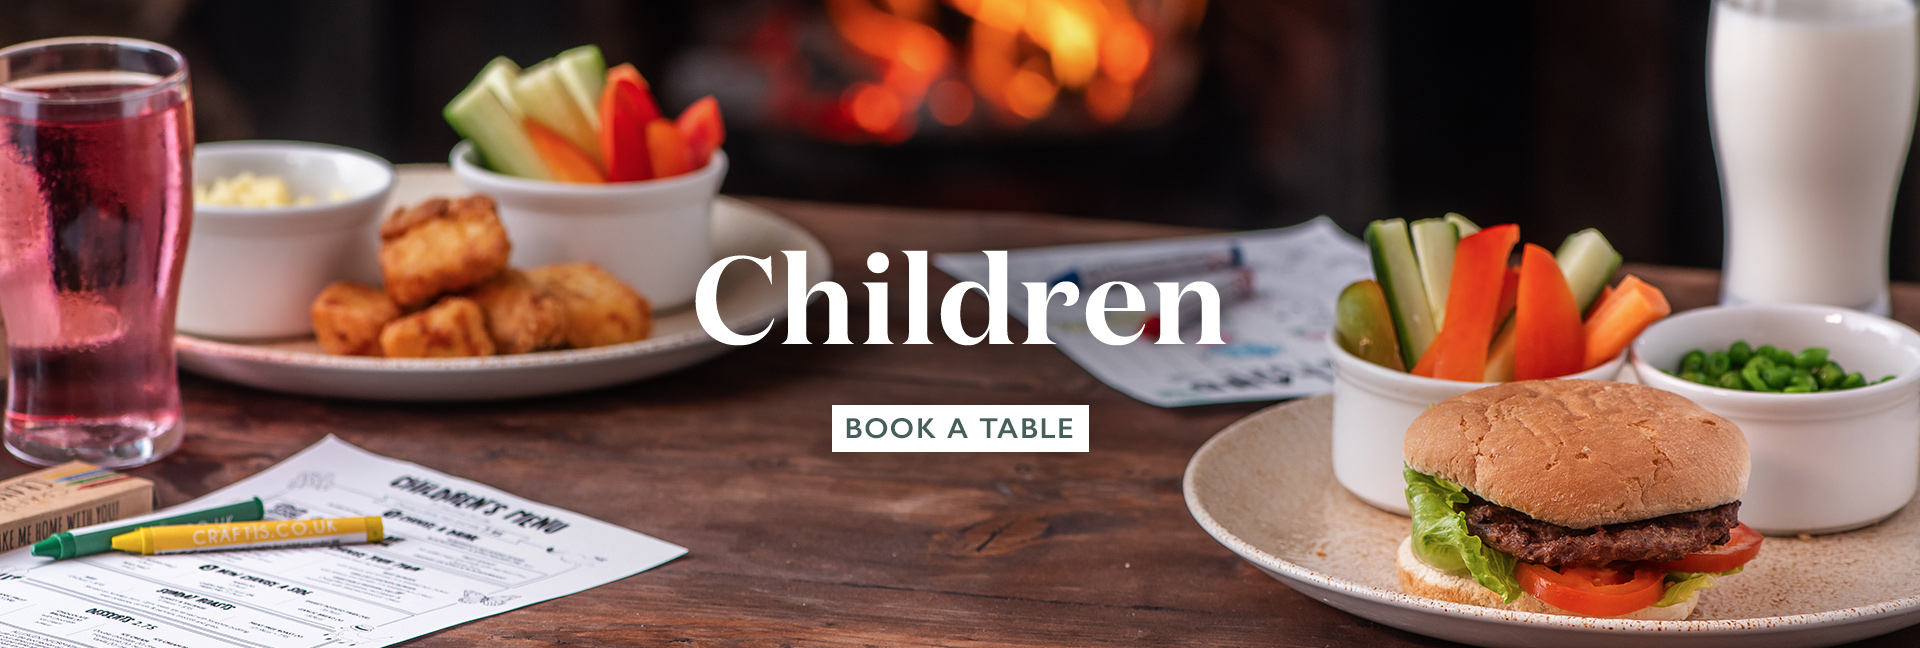 Children's Menu at The Glover Arms